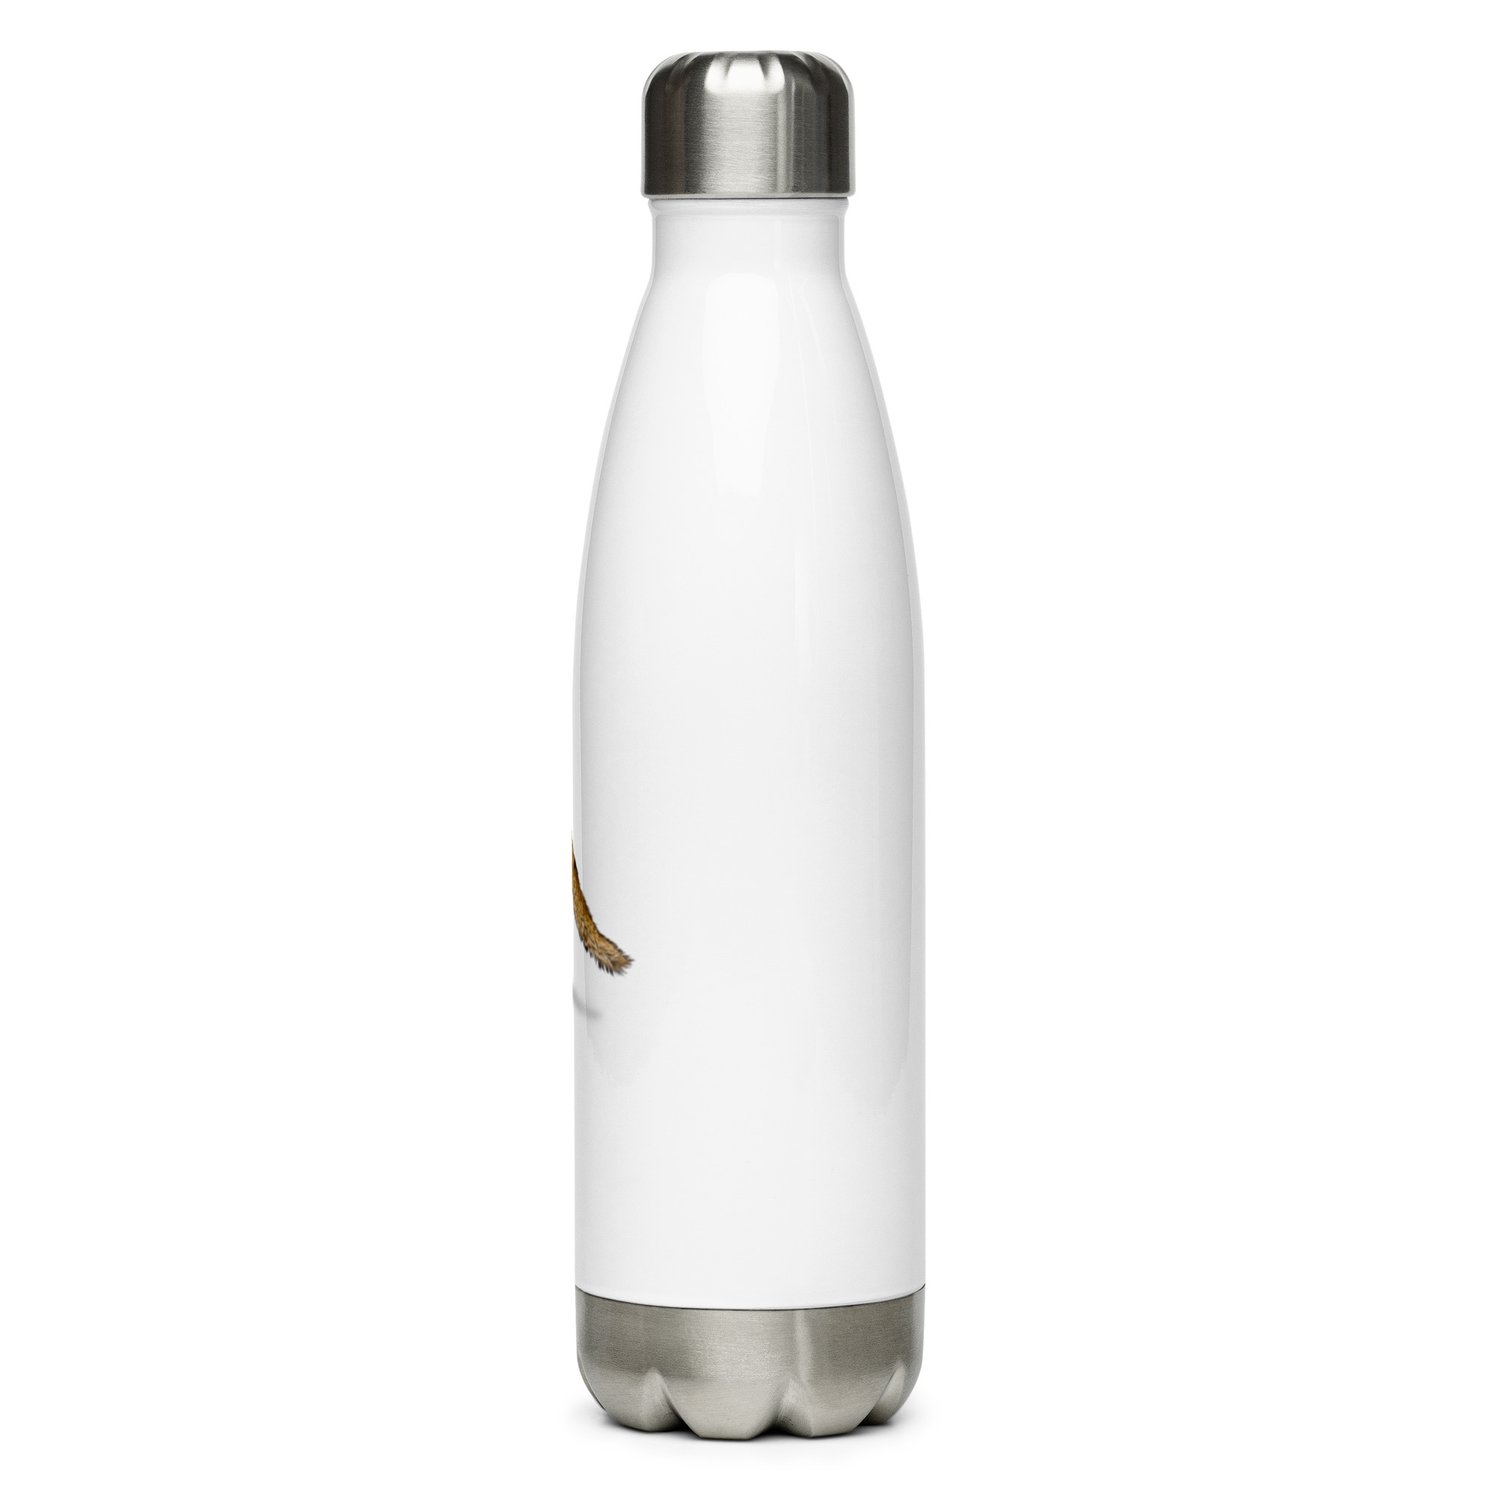 https://images.squarespace-cdn.com/content/v1/62827ac700bed8633fa08fb2/1654199857575-VCULBH47RMXUT36KD548/stainless-steel-water-bottle-white-17oz-back-629916262a5a7.jpg?format=1500w